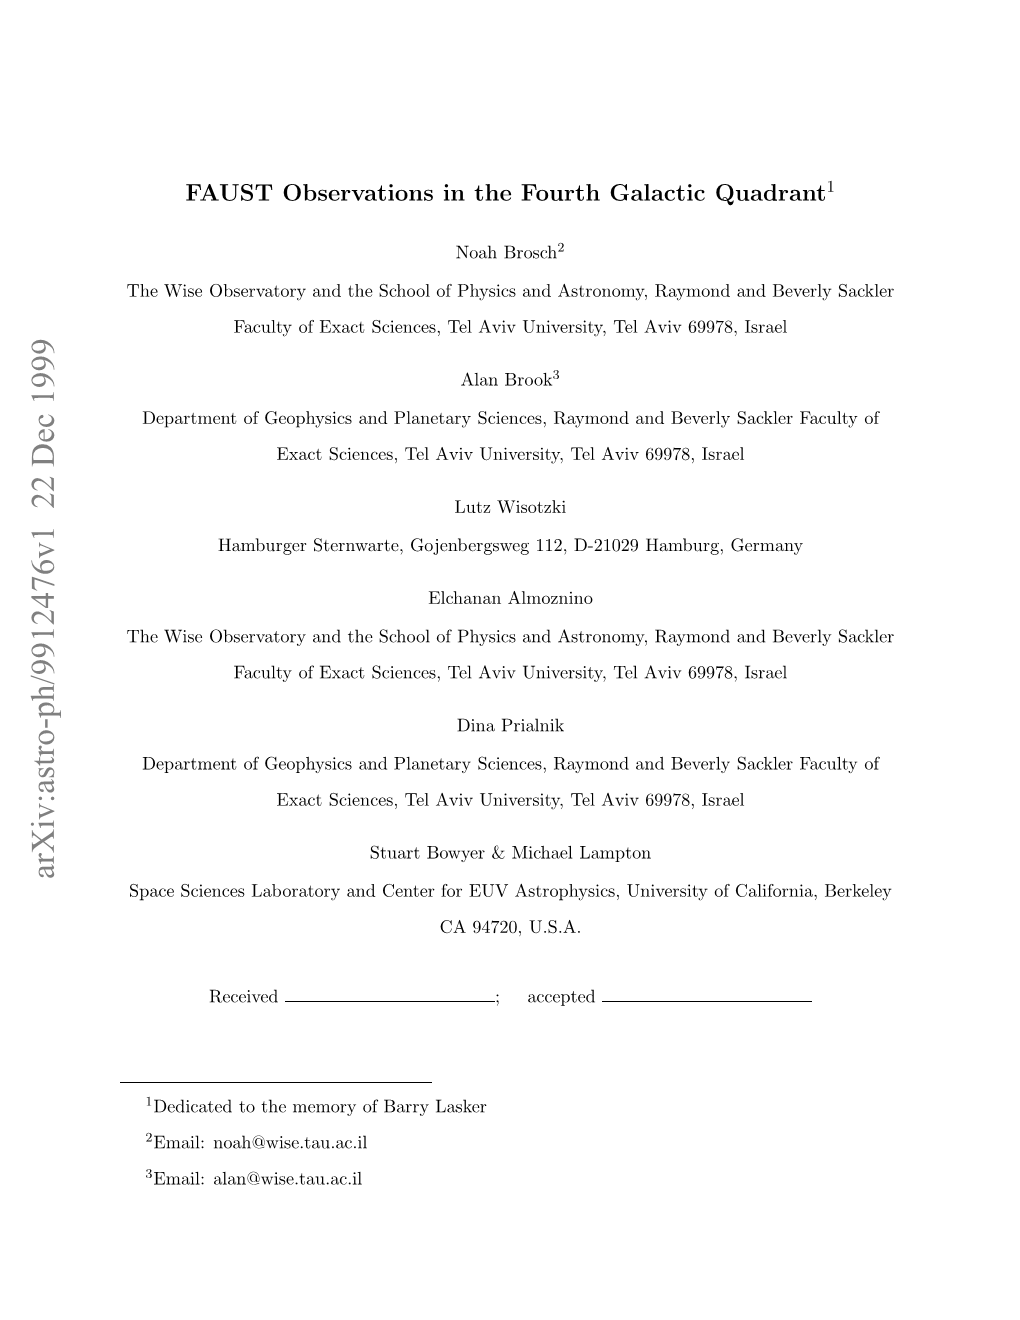 FAUST Observations in the Fourth Galactic Quadrant